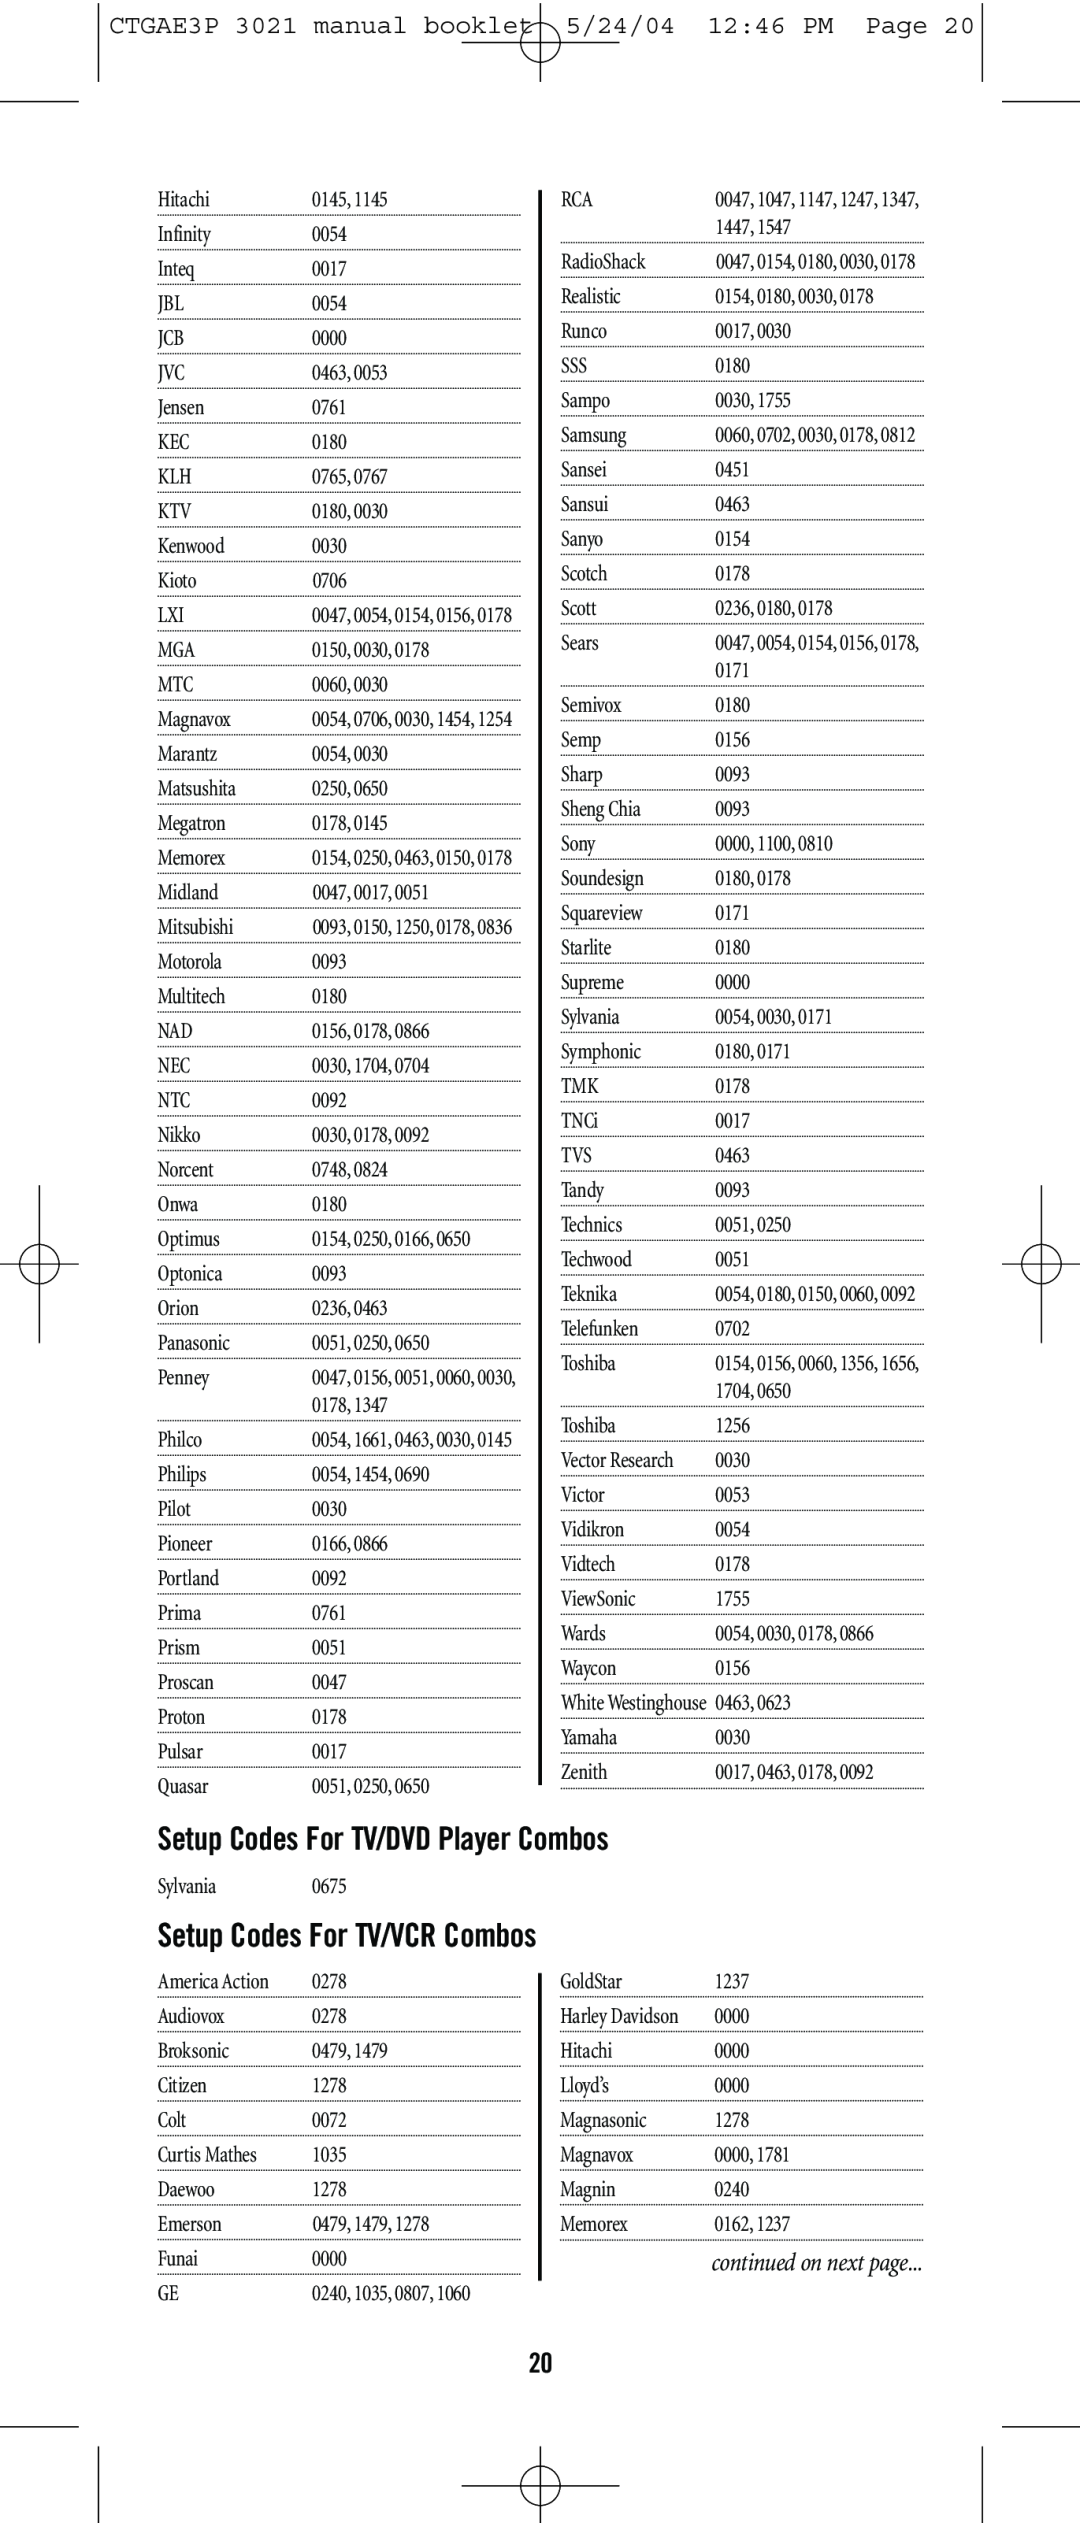 Universal Electronics URC-3021 Setup Codes For TV/DVD Player Combos, CTGAE3P 3021 manual booklet 5/24/04 1246 PM Page 